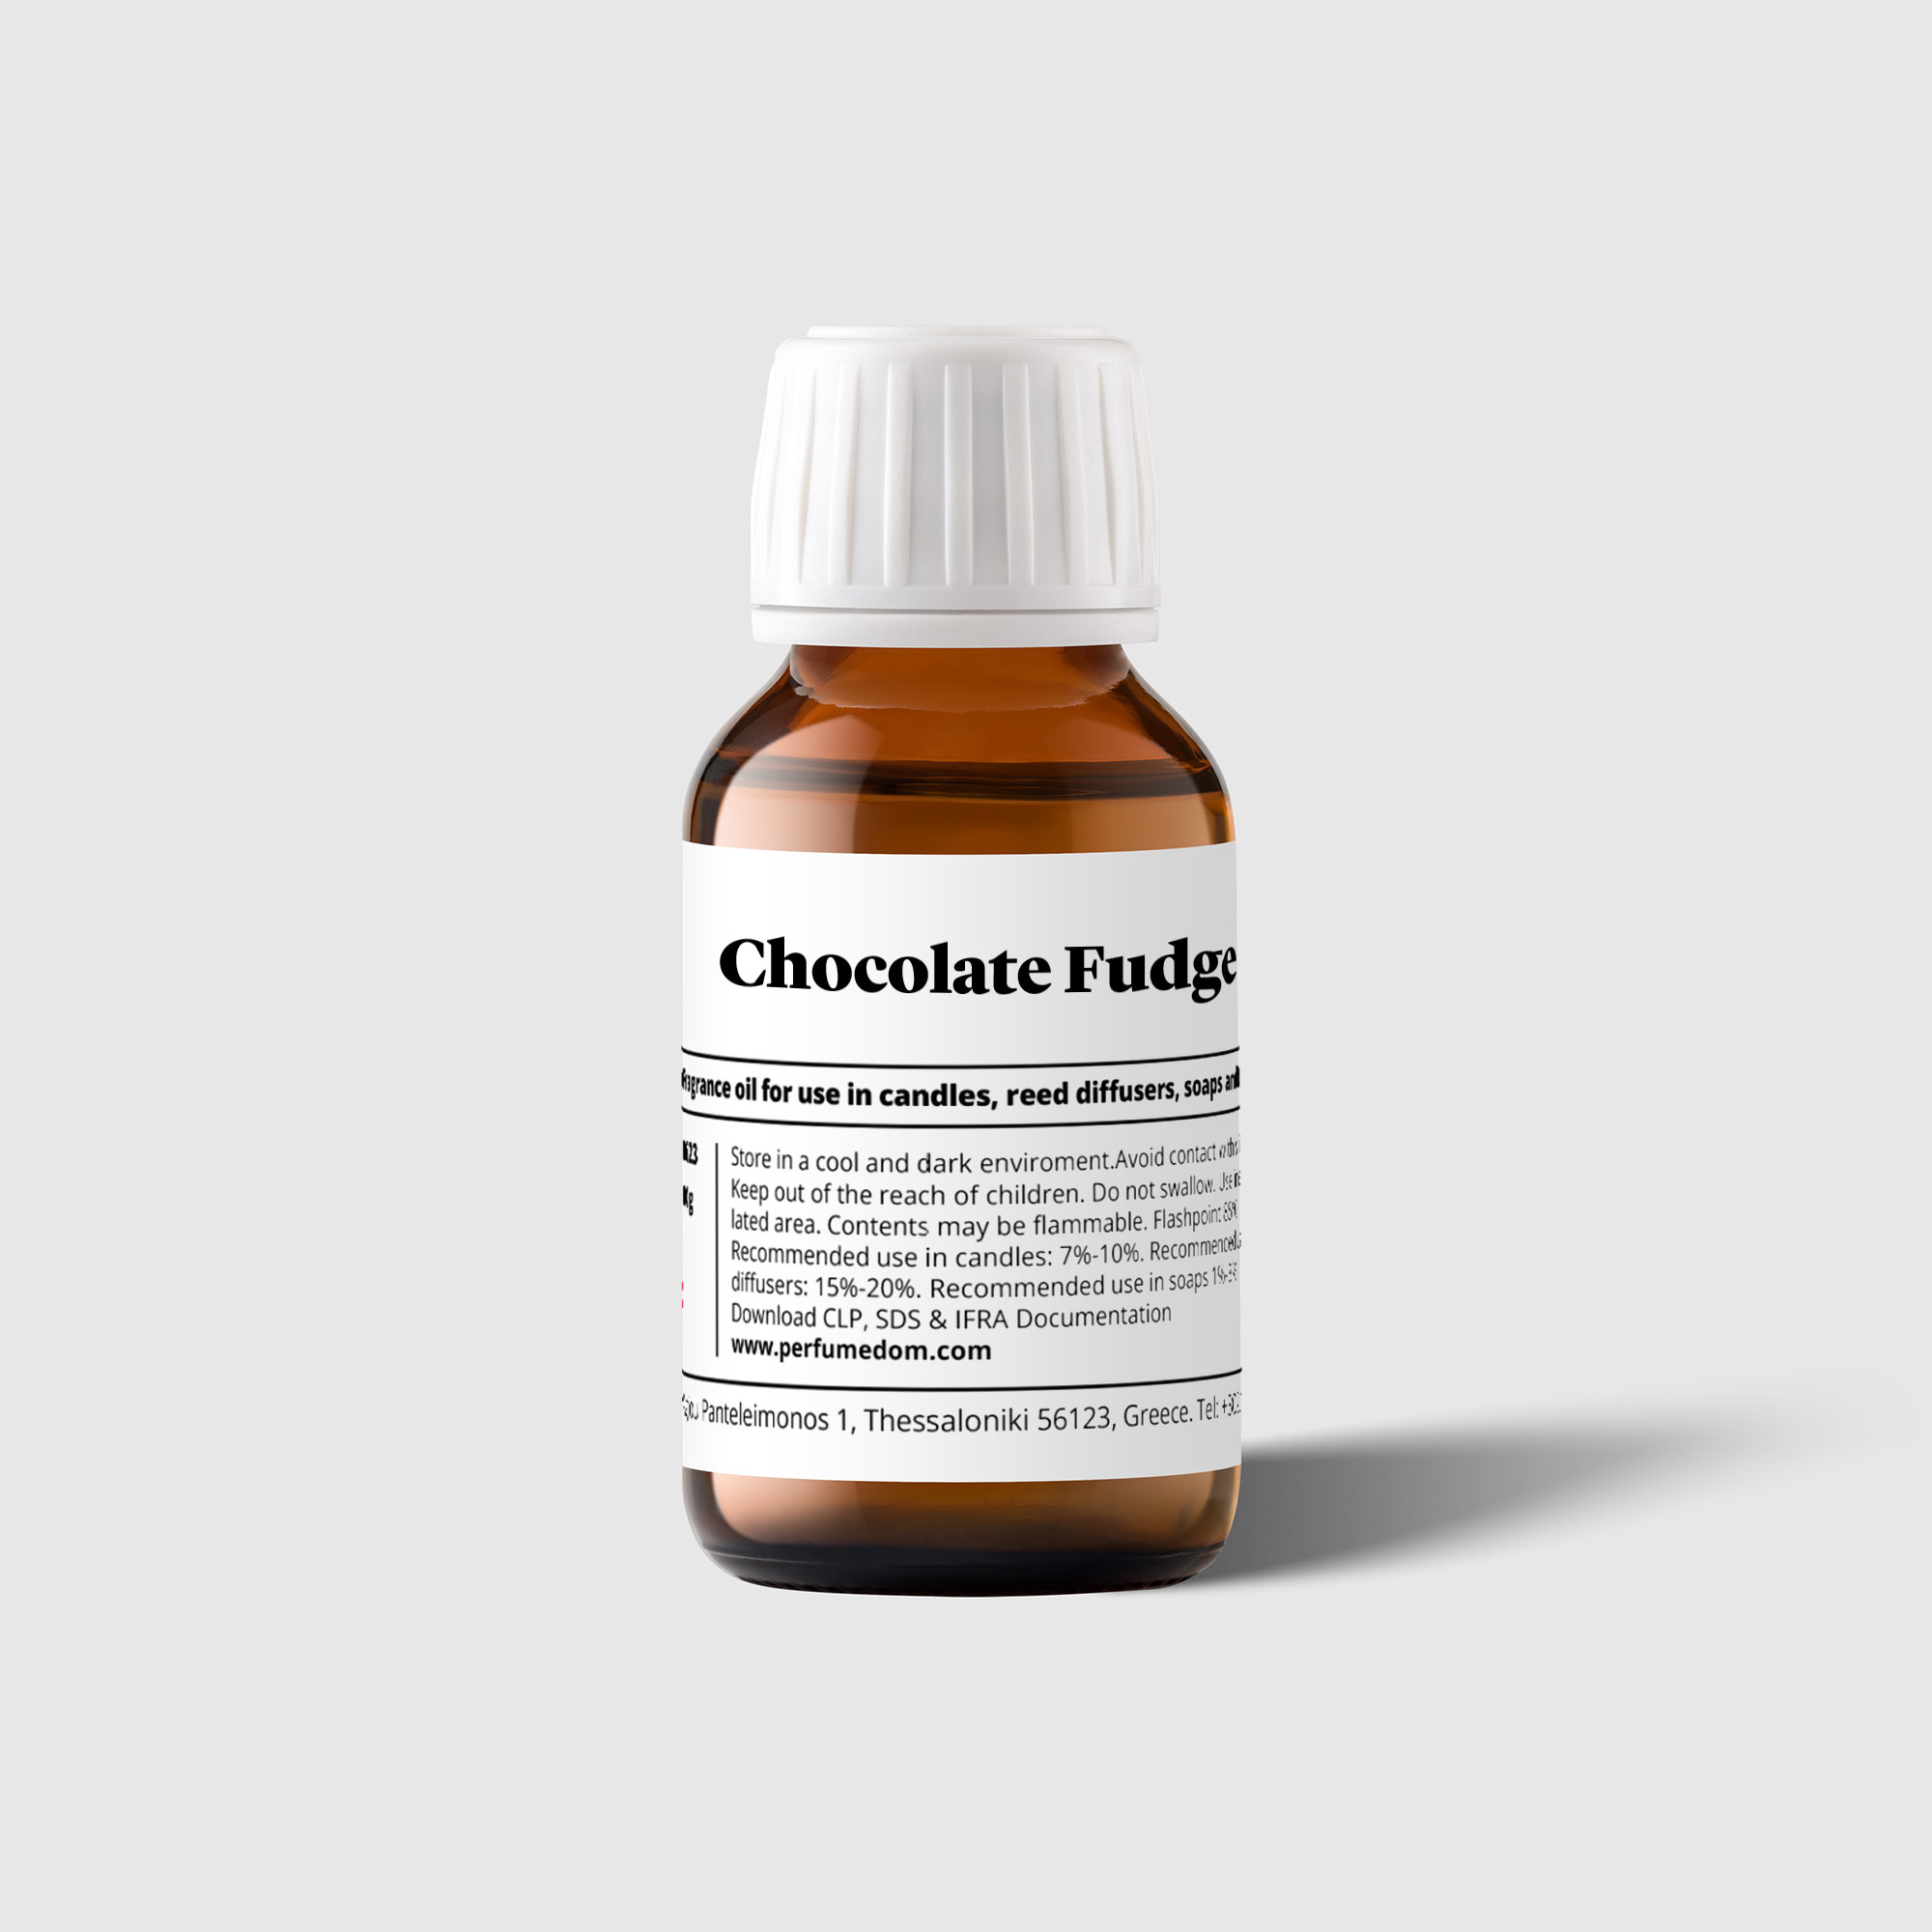 Discover the Scent Chocolate Fudge Fragrance - Aroma Oil for Scent